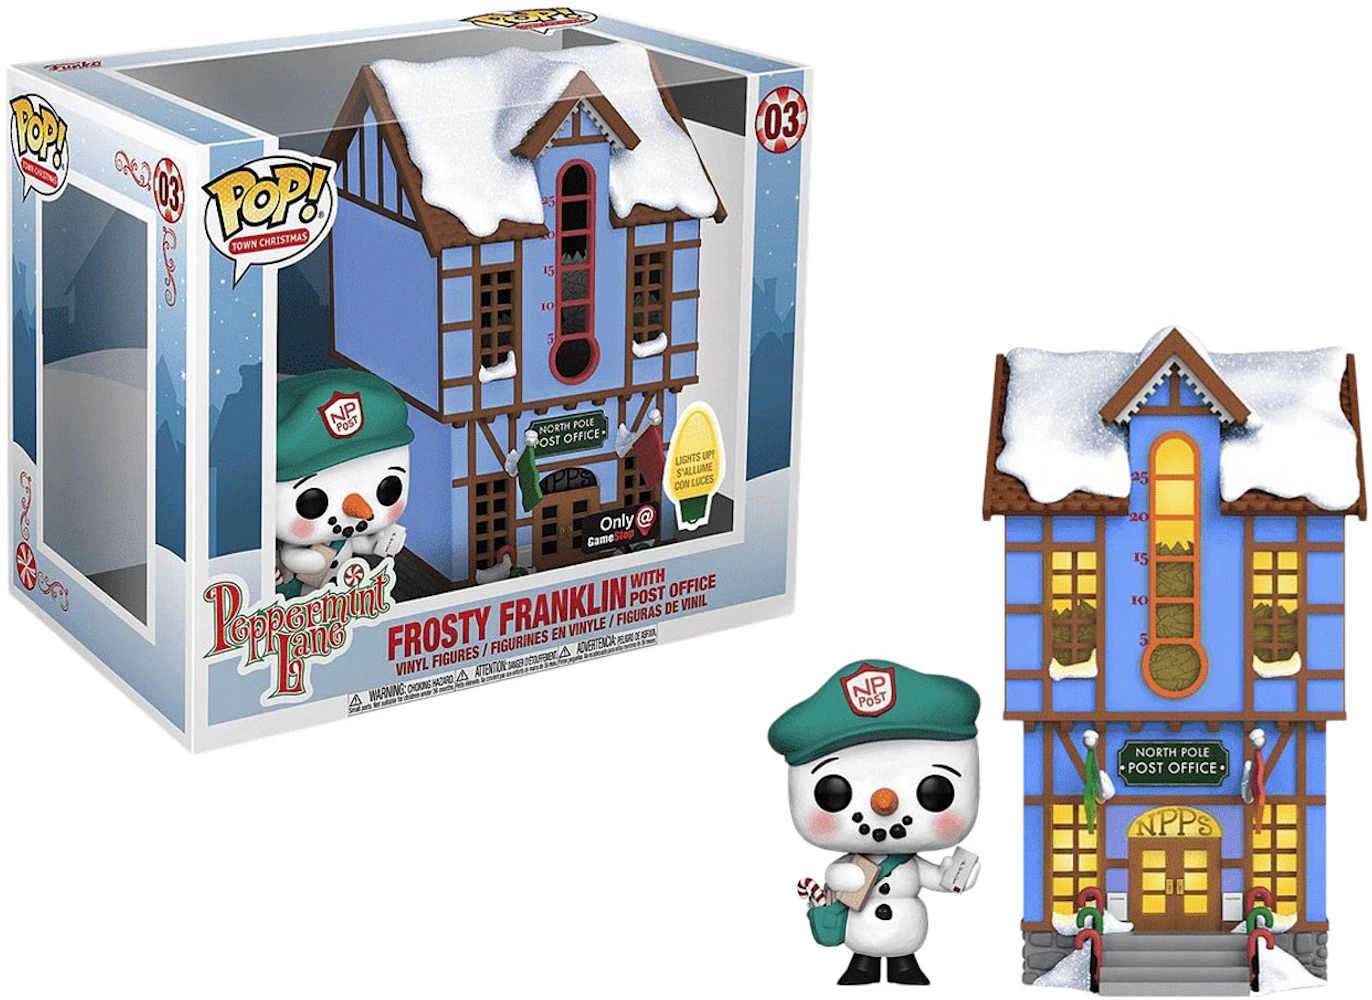 Funko Pop! Town Christmas Peppermint Lane Frosty Franklin with Post Office  (Light Up) GameStop Exclusive Figure #03 - US